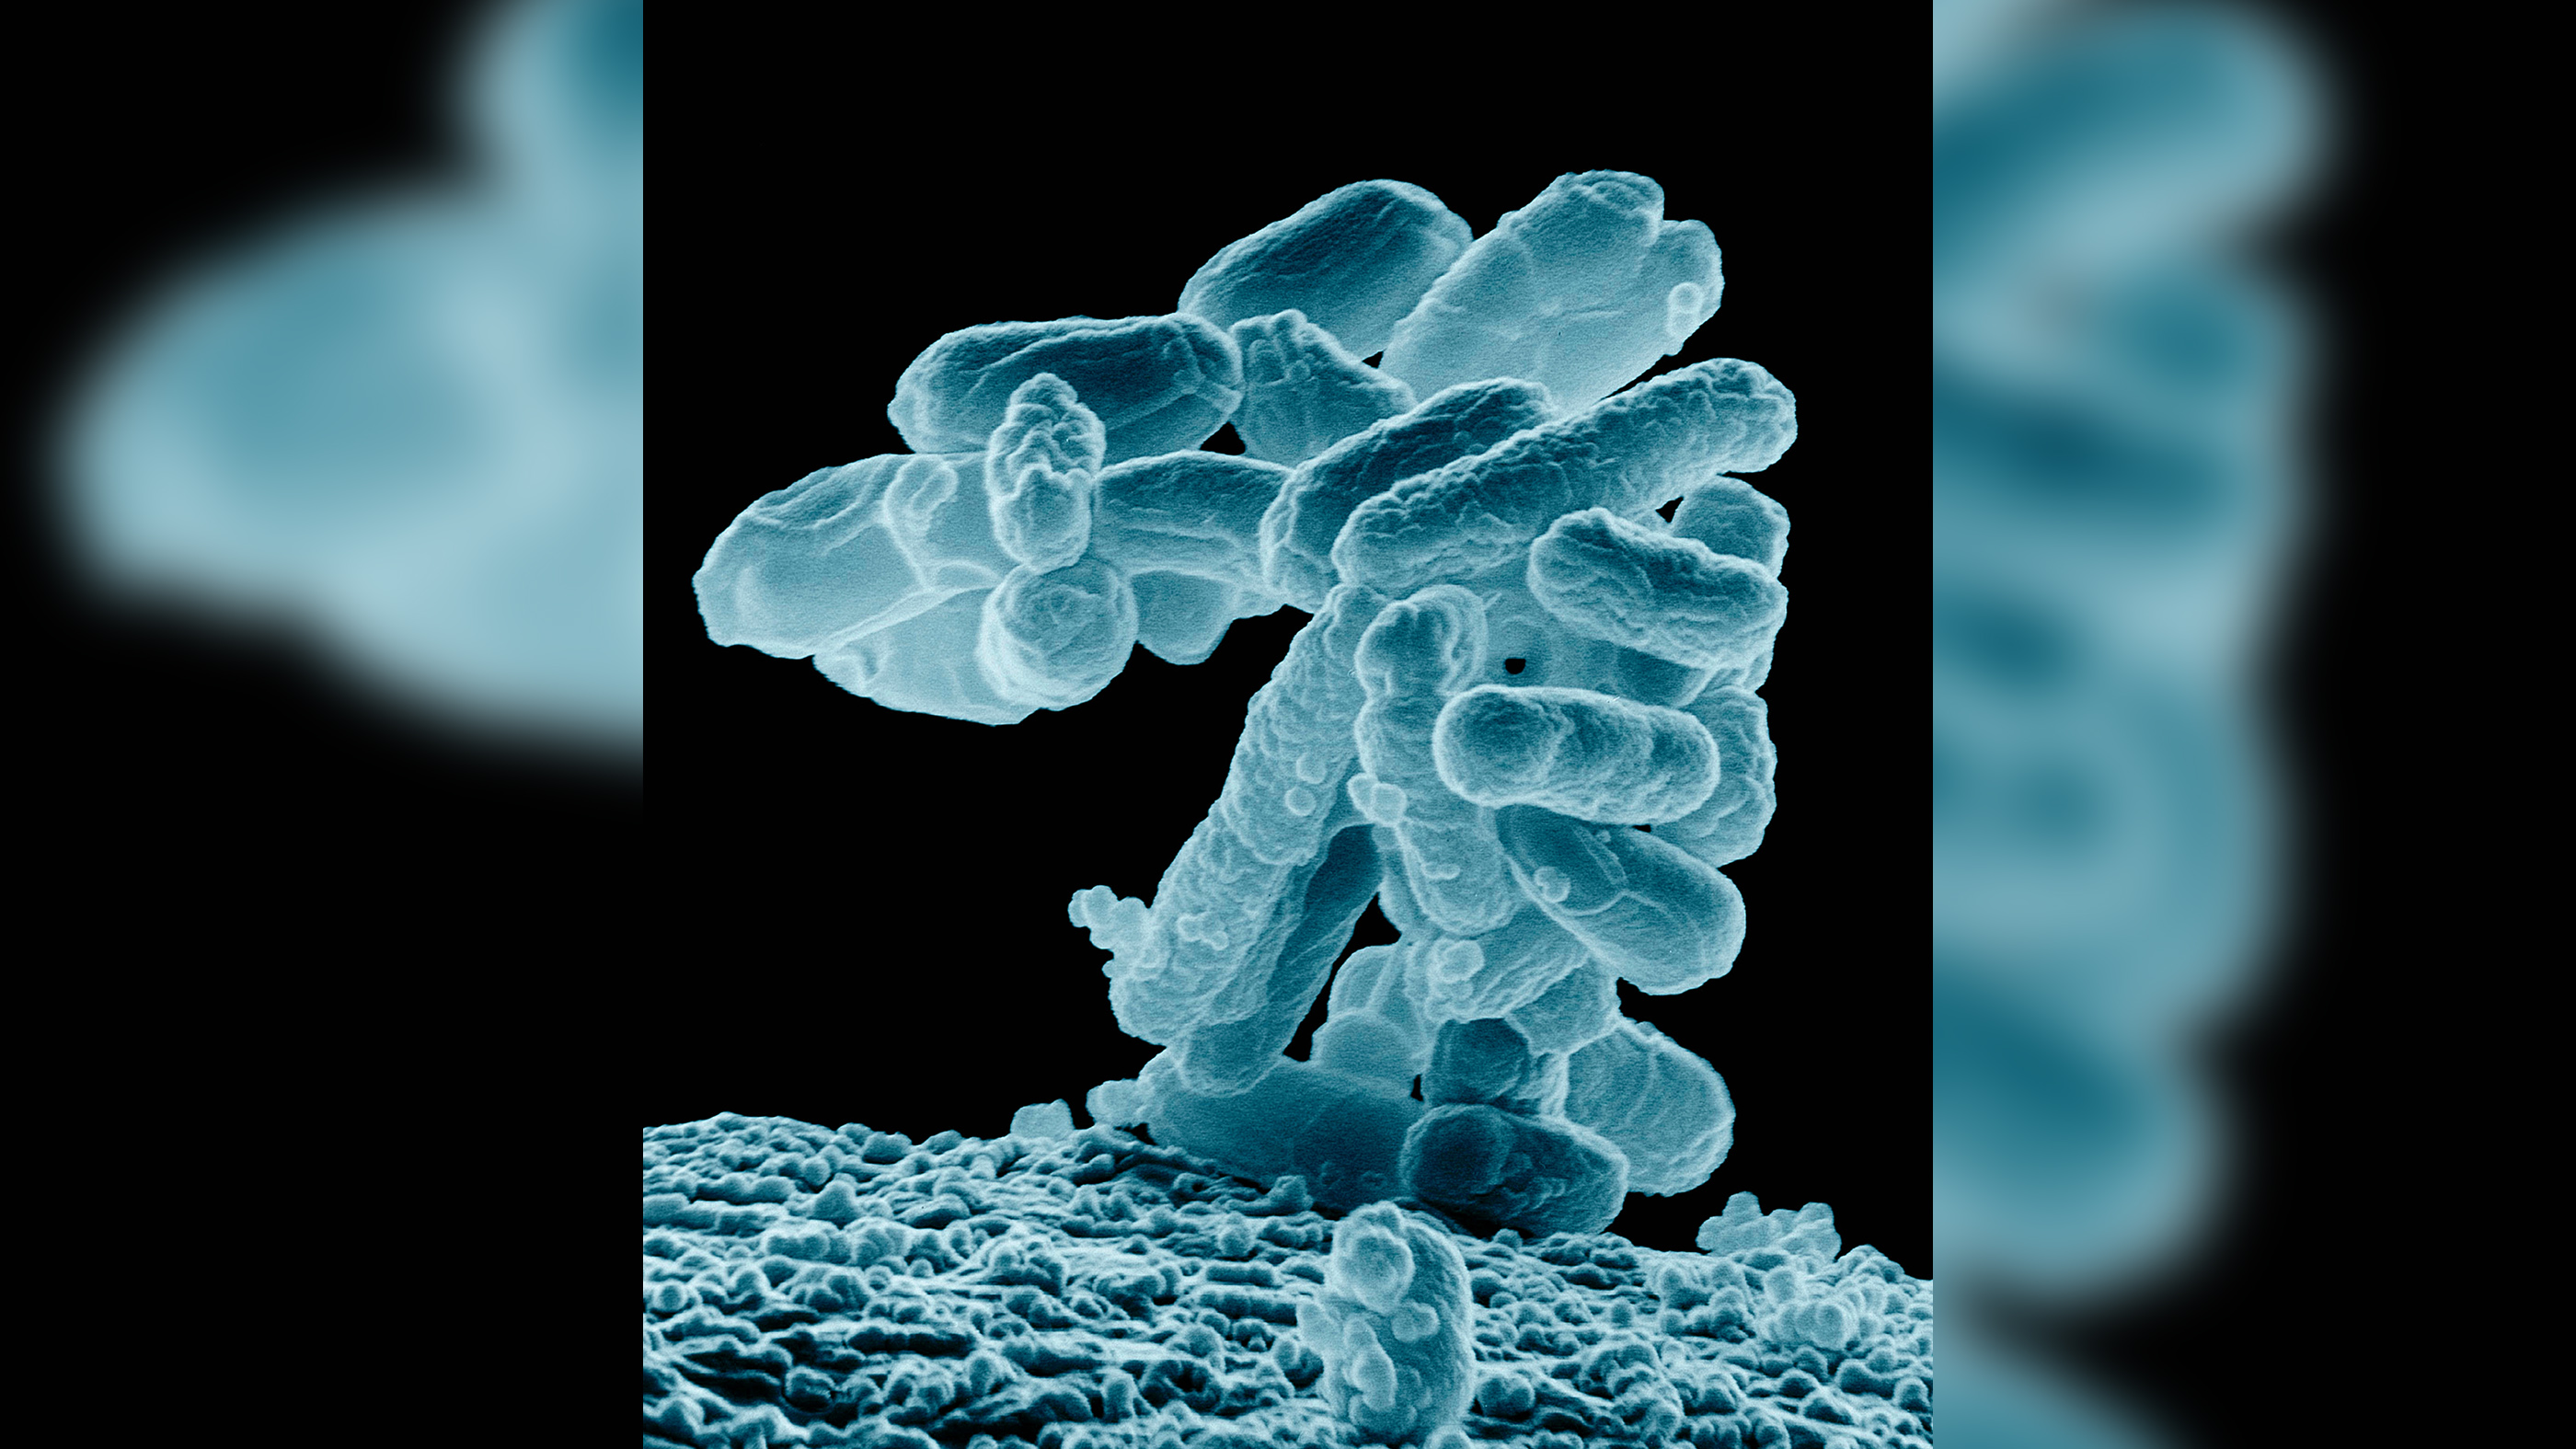 Researchers found first found the characteristic nucleotide repeats and spacers of Crisprs in the gut bacteria called E. Coli, shown here as a cluster in a scanning electron micrograph image.